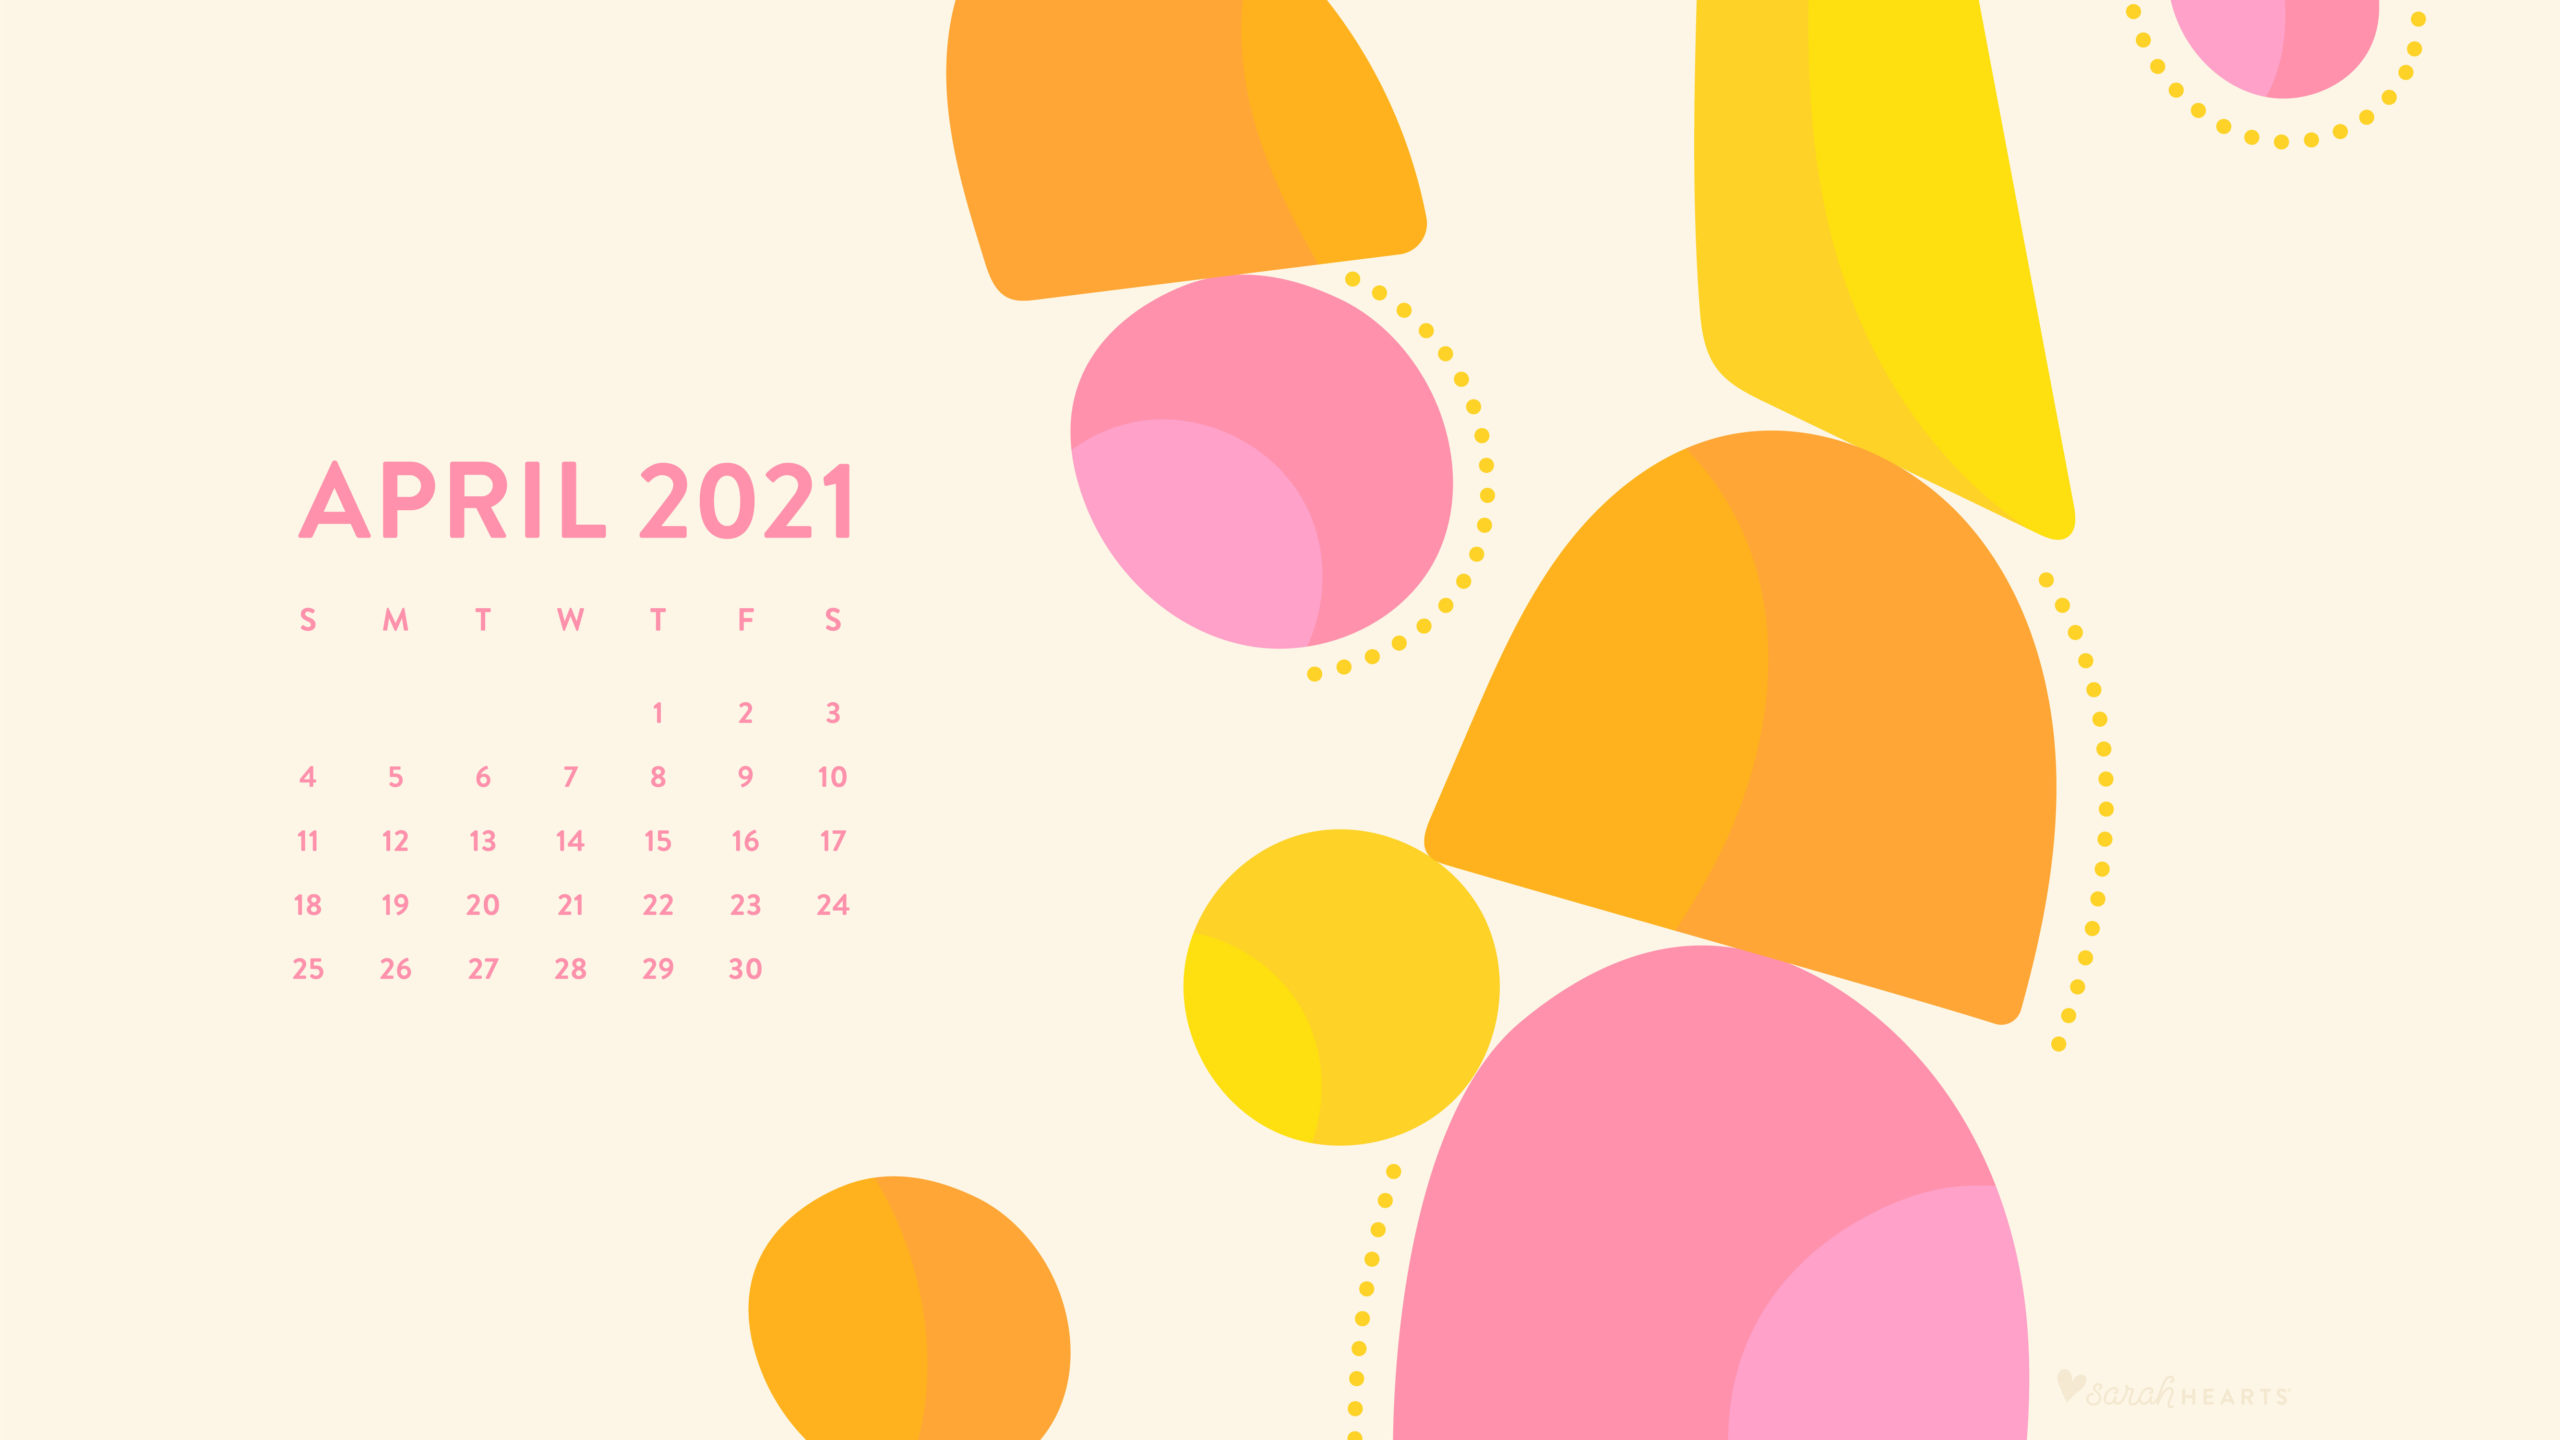 April 2022 Calendar Wallpaper Images  Free Photos PNG Stickers Wallpapers   Backgrounds  rawpixel